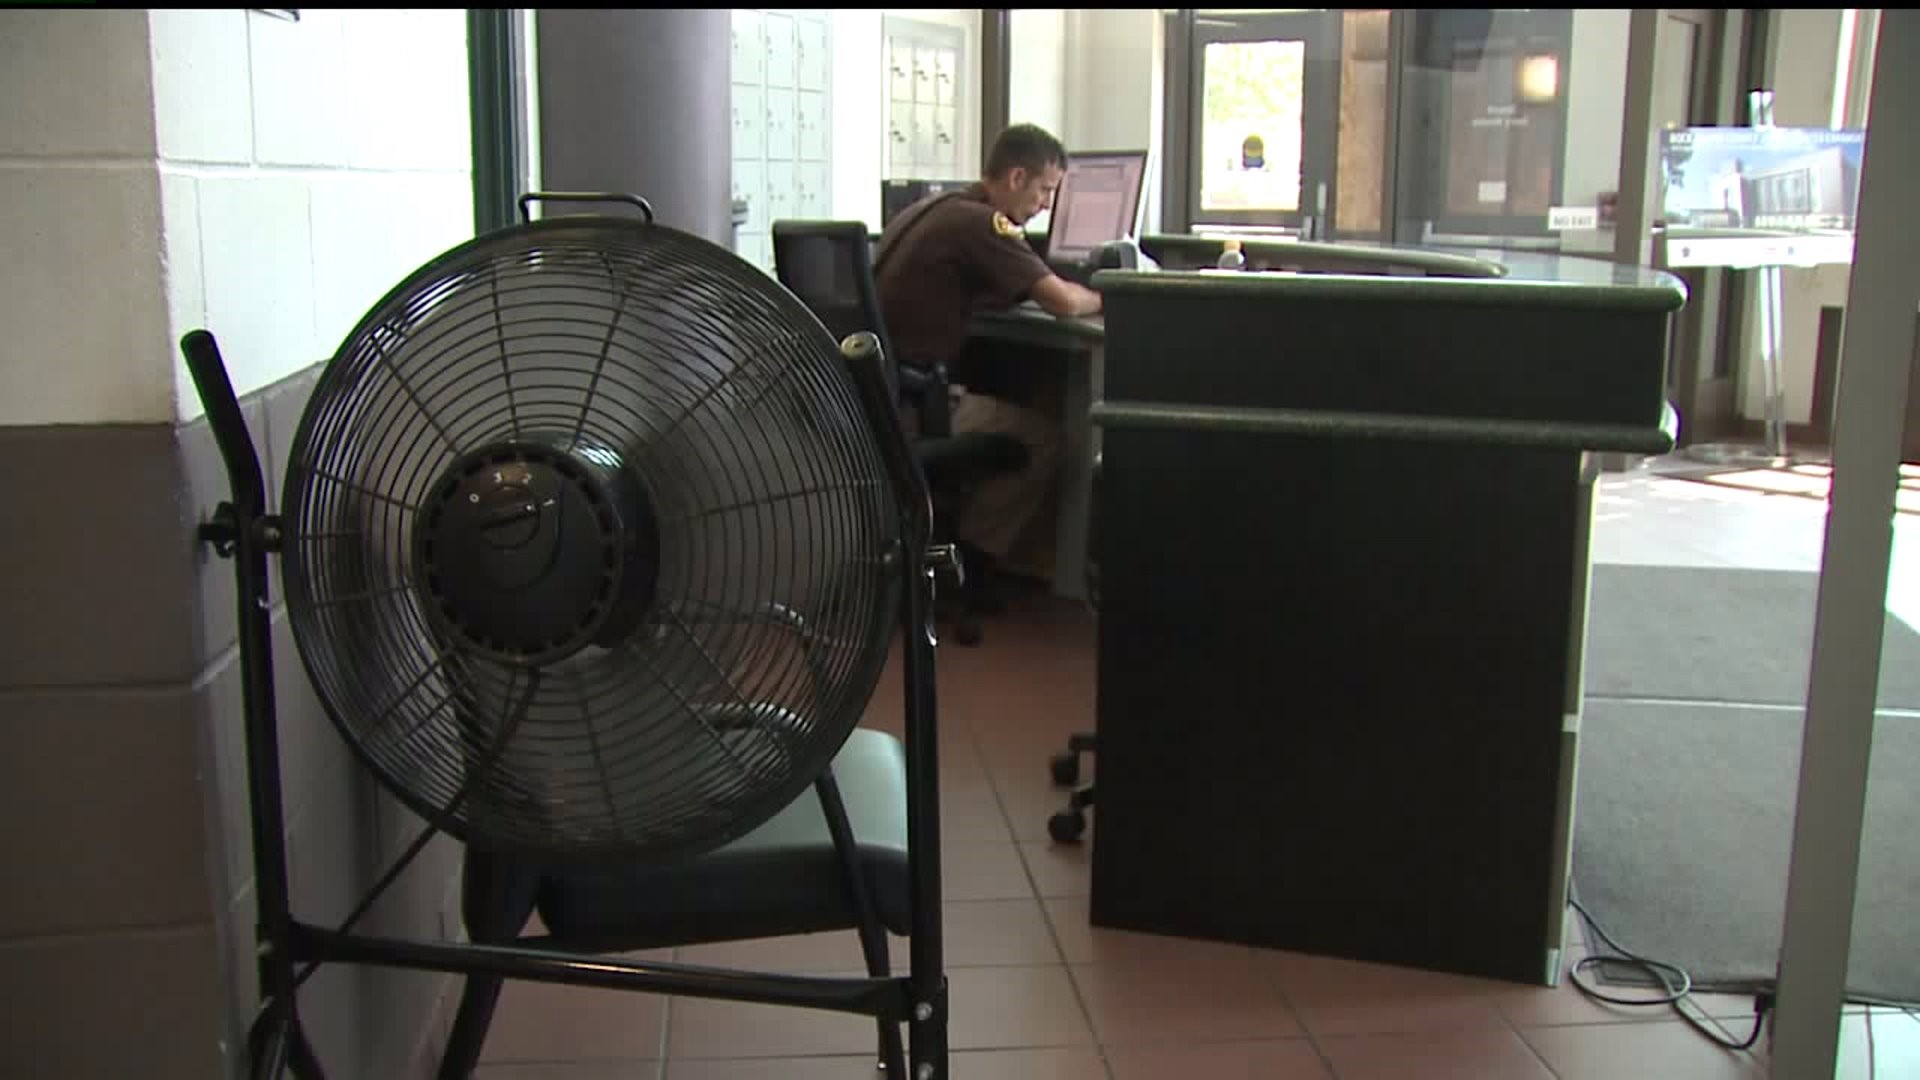 Rock Island County justice center dealing with air conditioning issues